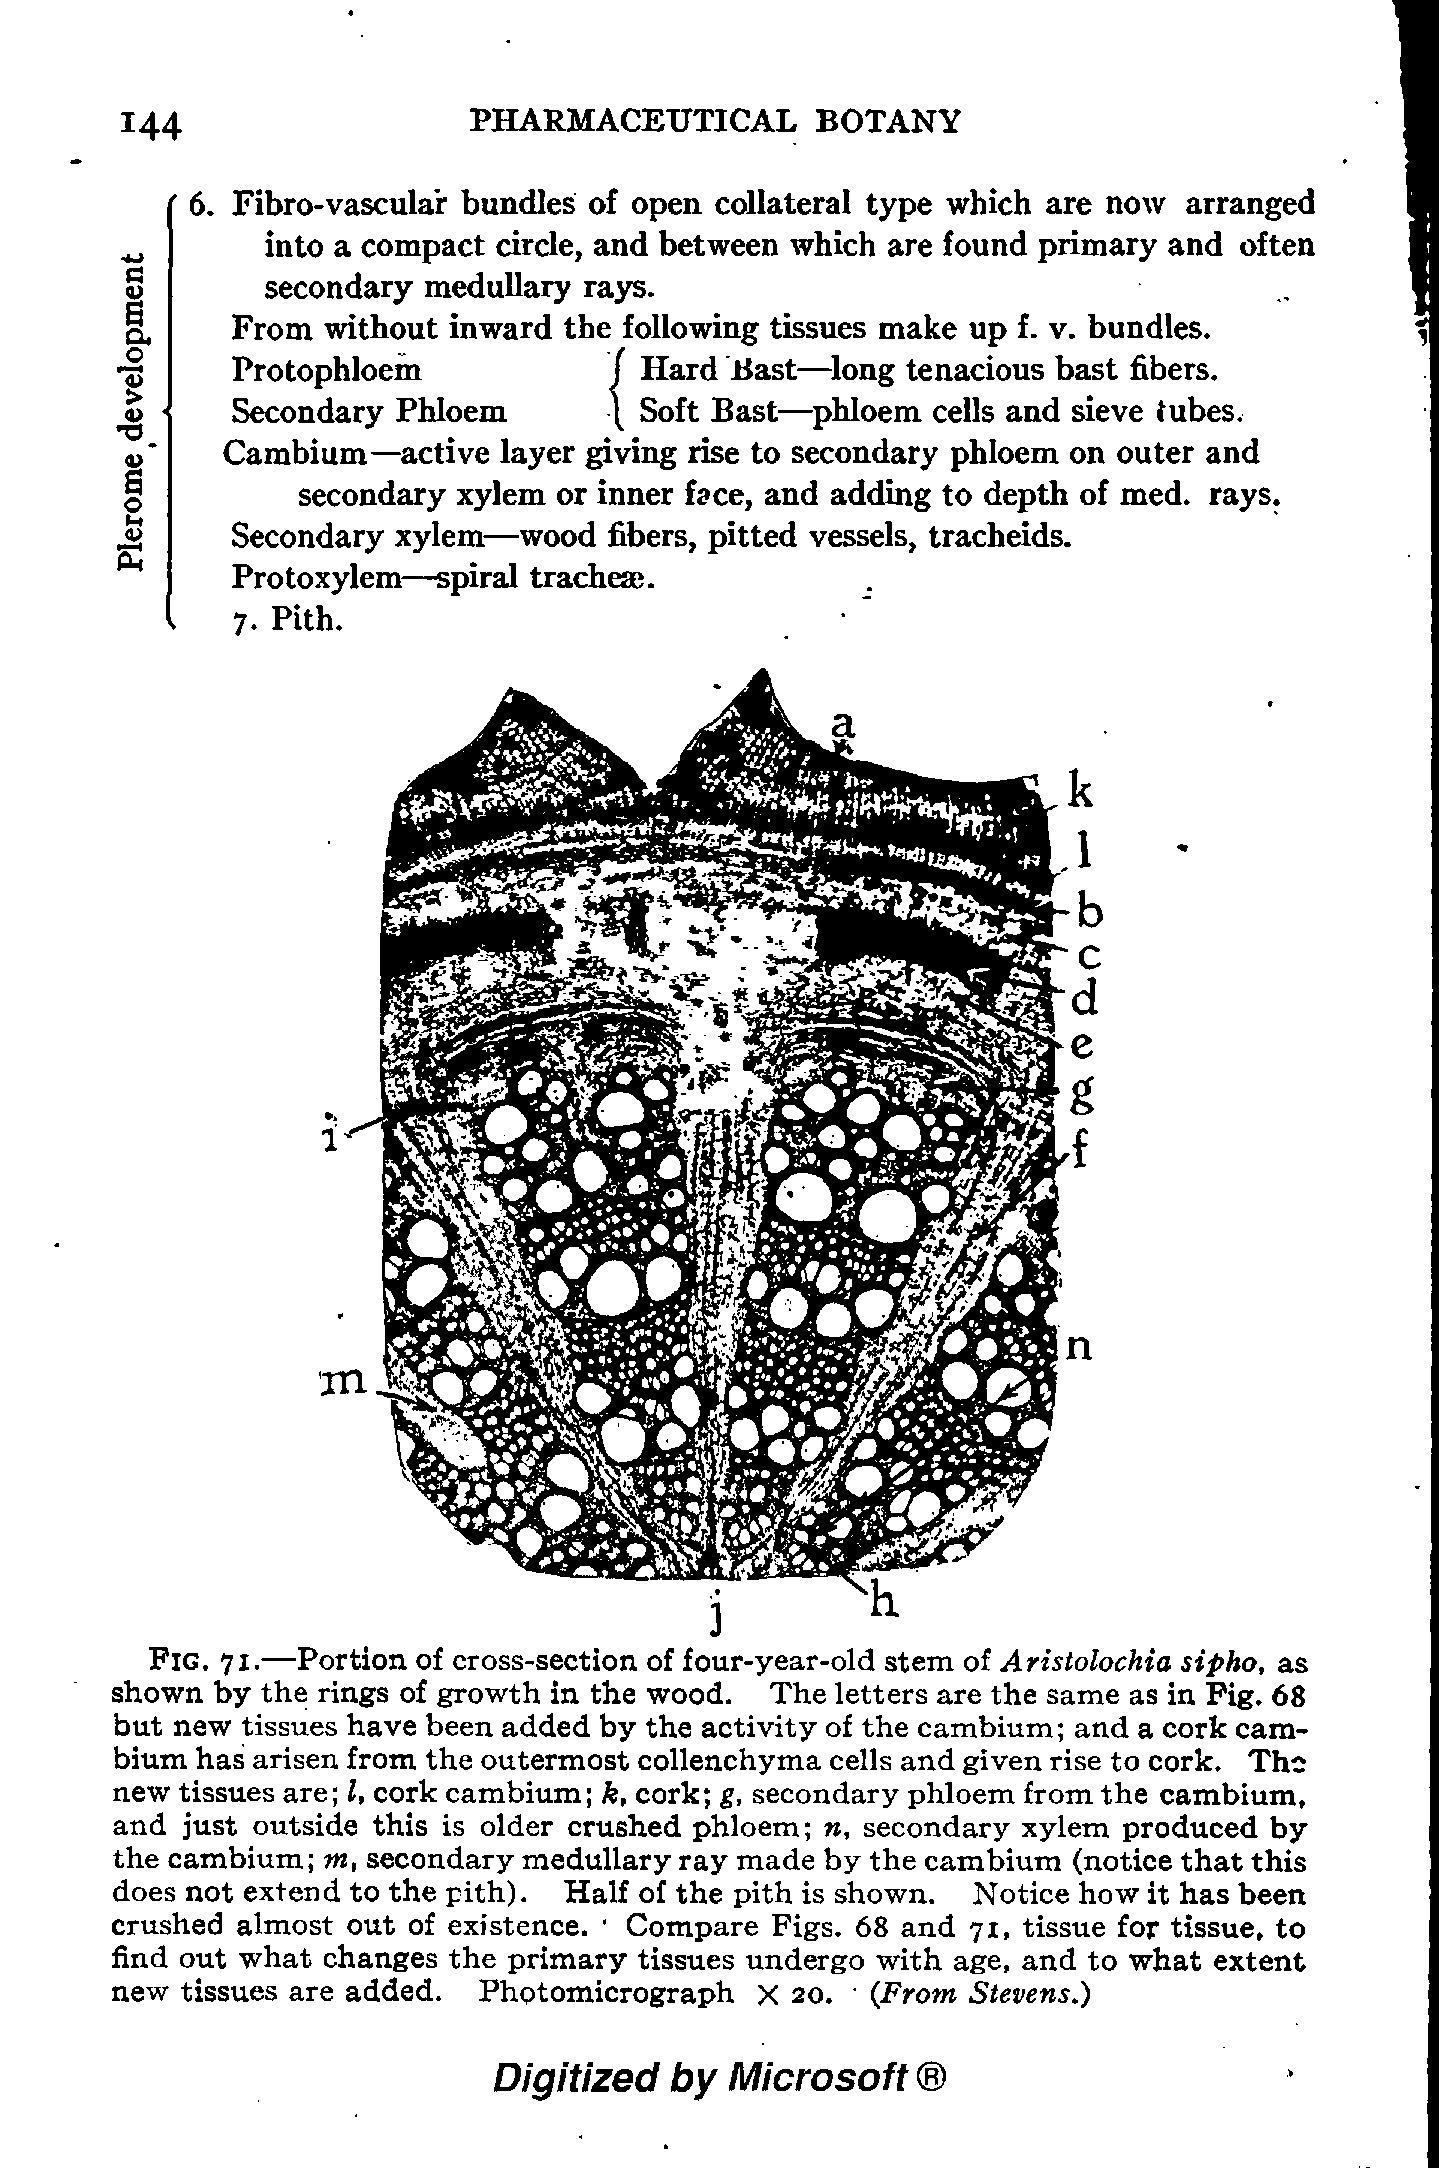 Fig. 71.—Portion of cross-section of four-year-old stem of Aristolochia sipho, as shown by the rings of growth in the wood. The letters are the same as in Pig. 68 but new tissues have been added by the activity of the cambium and a cork cambium has arisen from the outermost collenchyma cells and given rise to cork. The new tissues are I, cork cambium k, cork g, secondary phloem from the cambium, and just outside this is older crushed phloem , secondary xylem produced by the cambium m, secondary medullary ray made by the cambium (notice that this does not extend to the pith). Half of the pith is shown. Notice how it has been crushed almost out of existence. Compare Figs. 68 and 71, tissue for tissue, to find out what changes the primary tissues undergo with age, and to what extent new tissues are added. Photomicrograph x 20. (From Stevens.)...